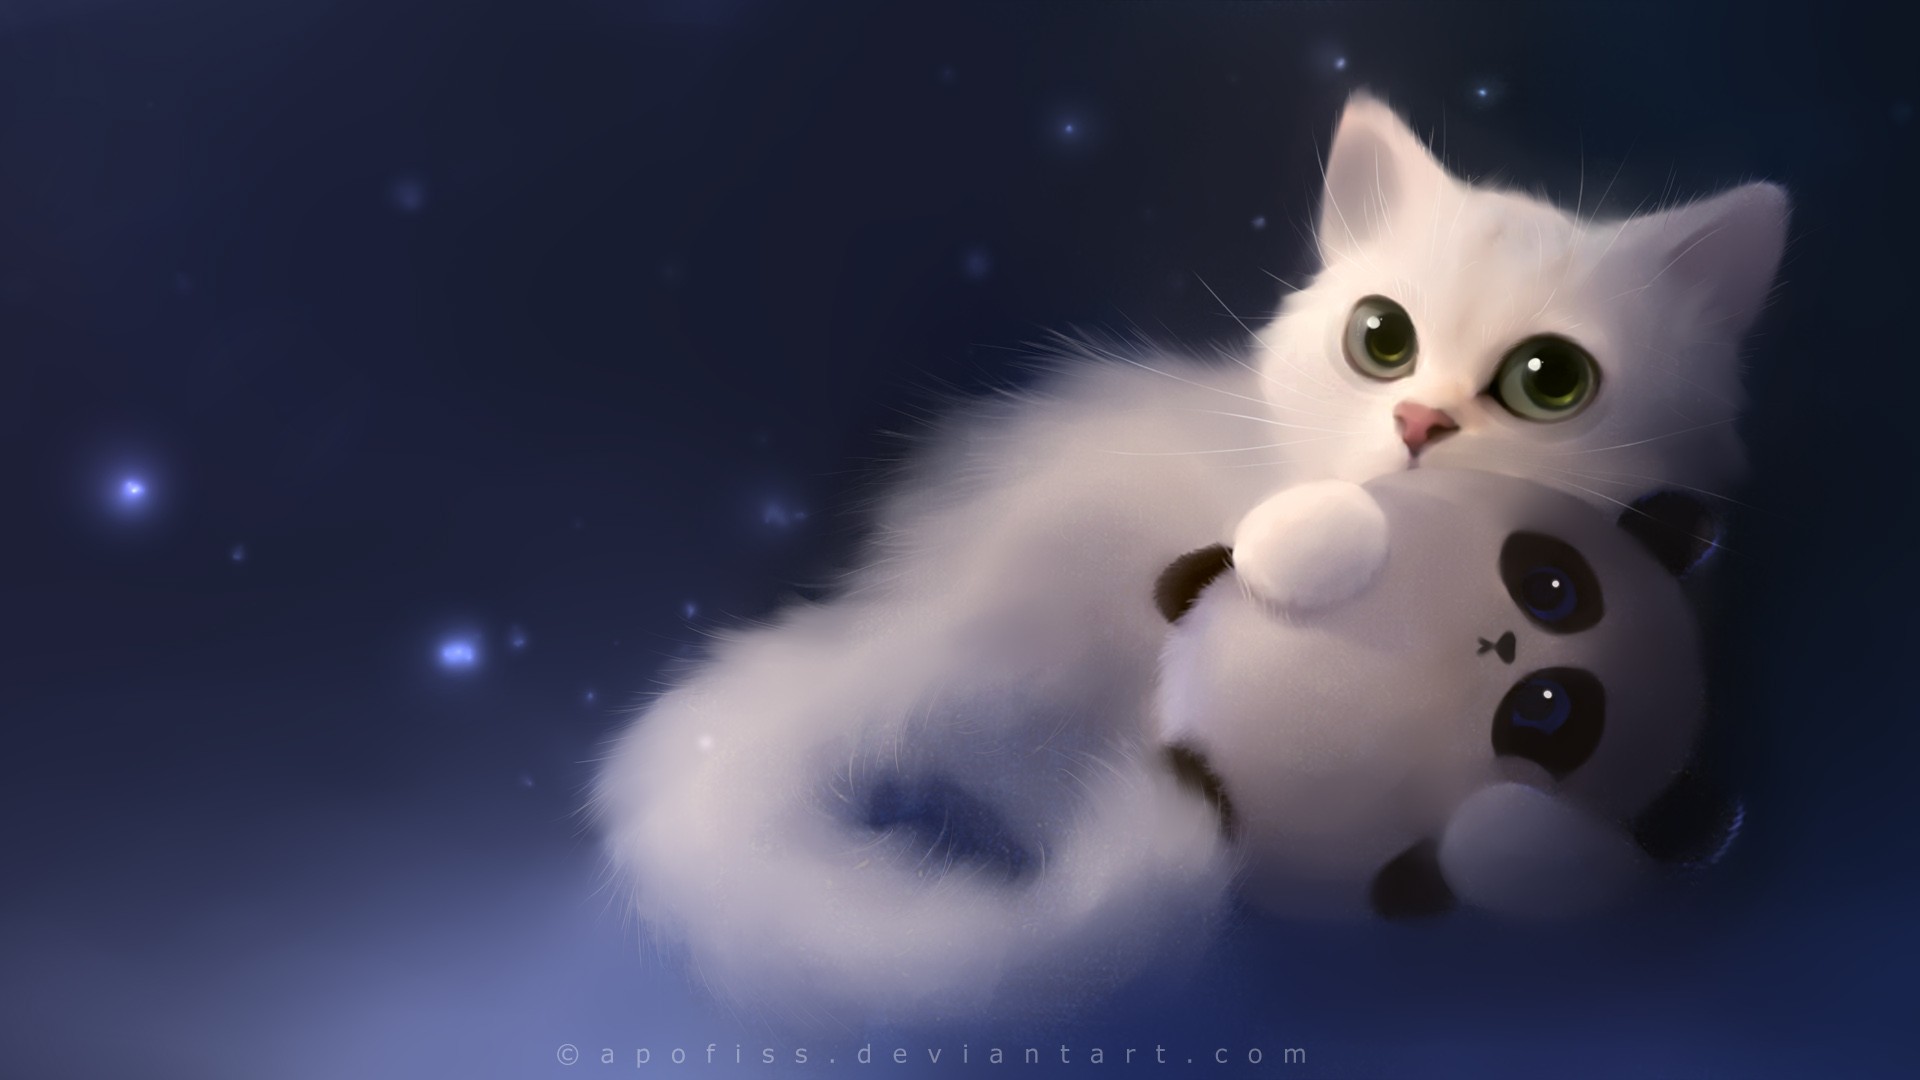 Adorable Anime Cat White Wallpapers #10921 | WallpapersGround.com